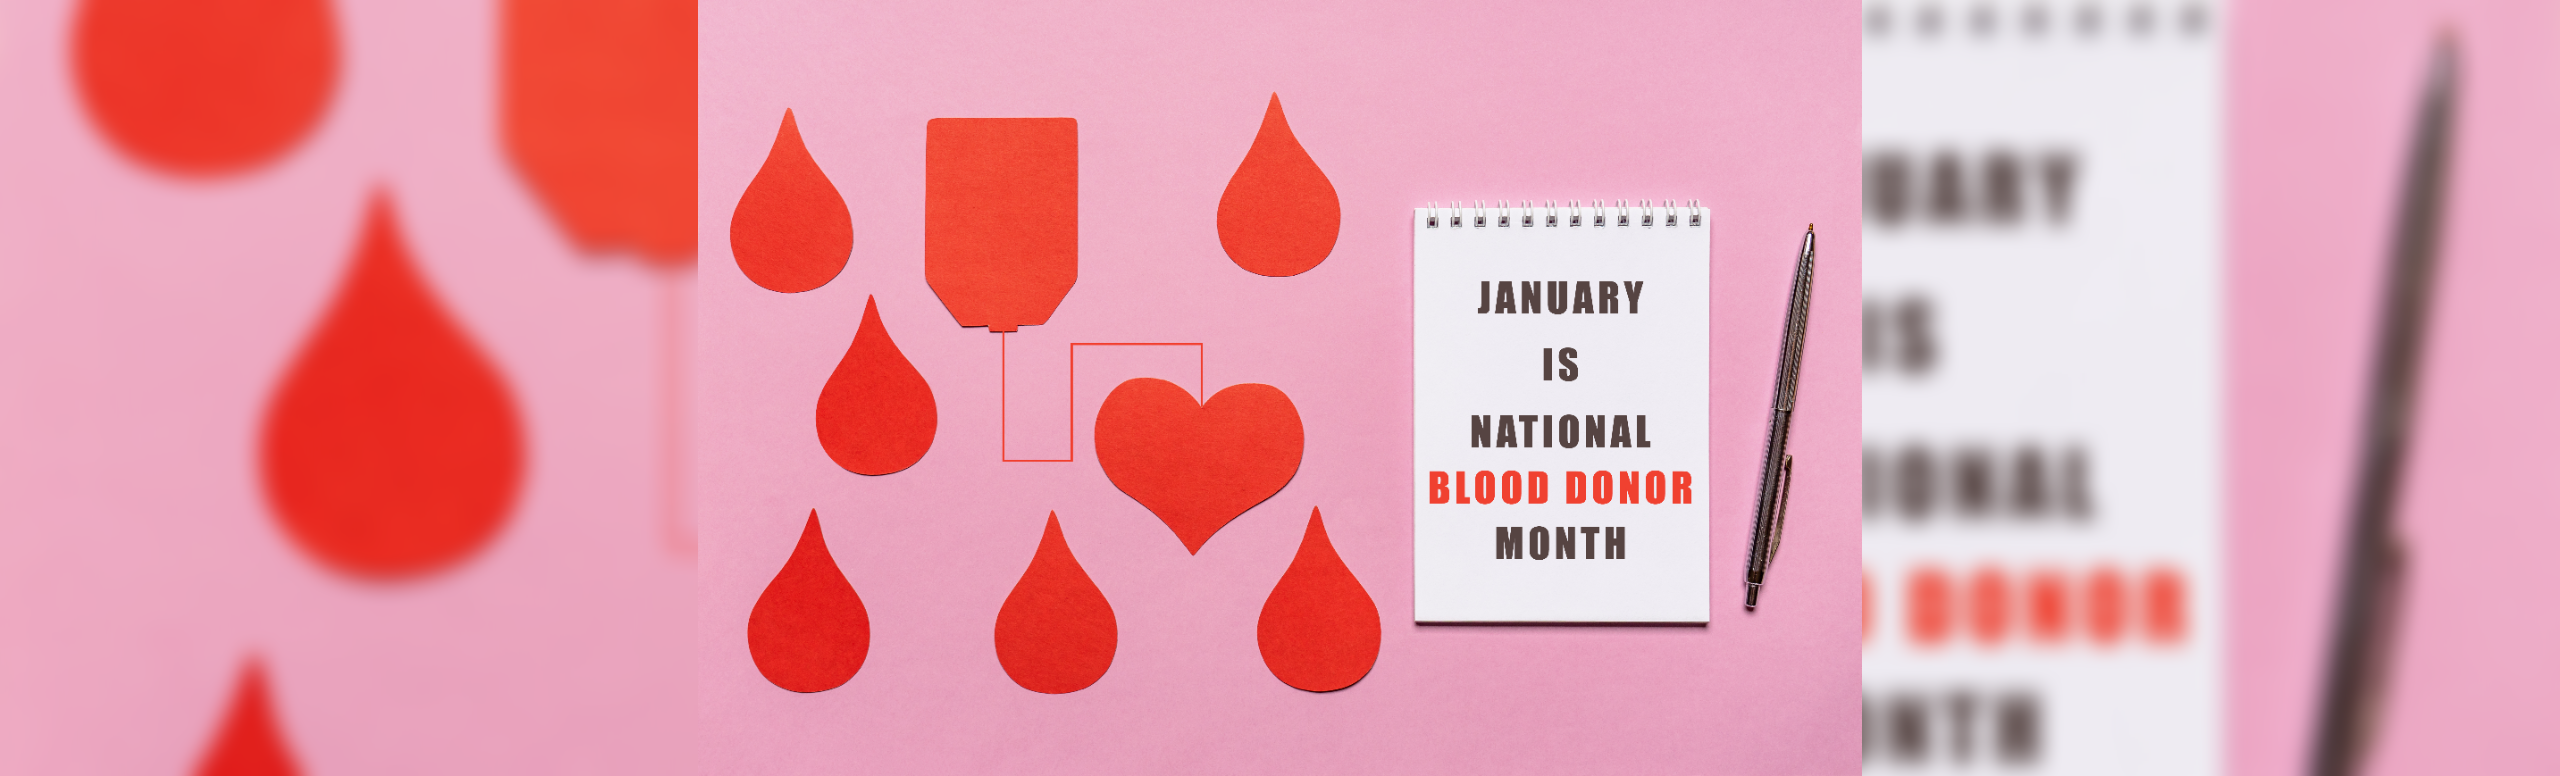 JANUARY IS NATIONAL BLOOD DONOR MONTH